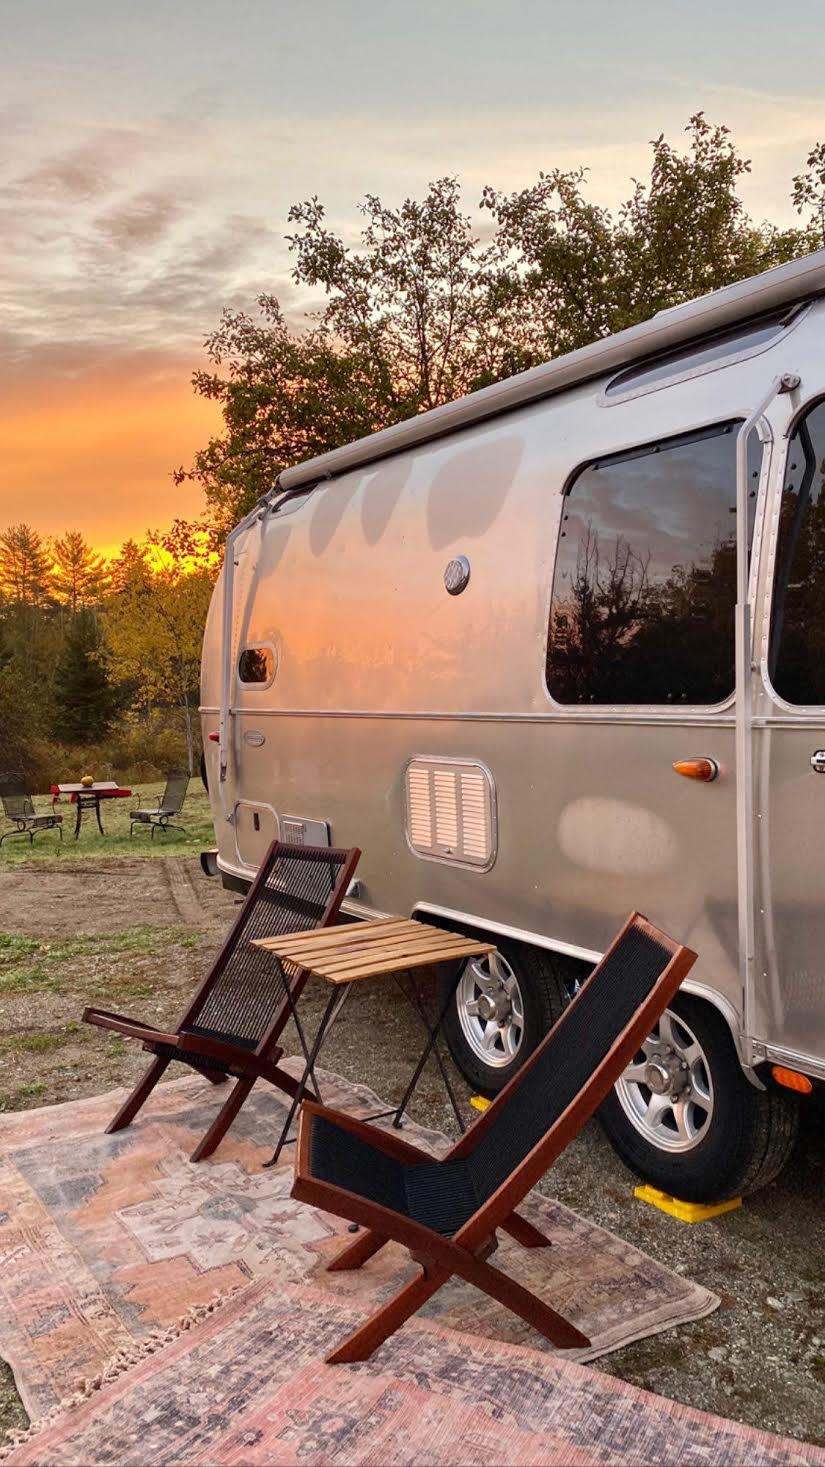 October 2020 sunrise at Ellie's RV spot. We have had 100 percent occupancy for fall, book early. Photo courtesy of Instagram camper Karen @cedarandsilver 